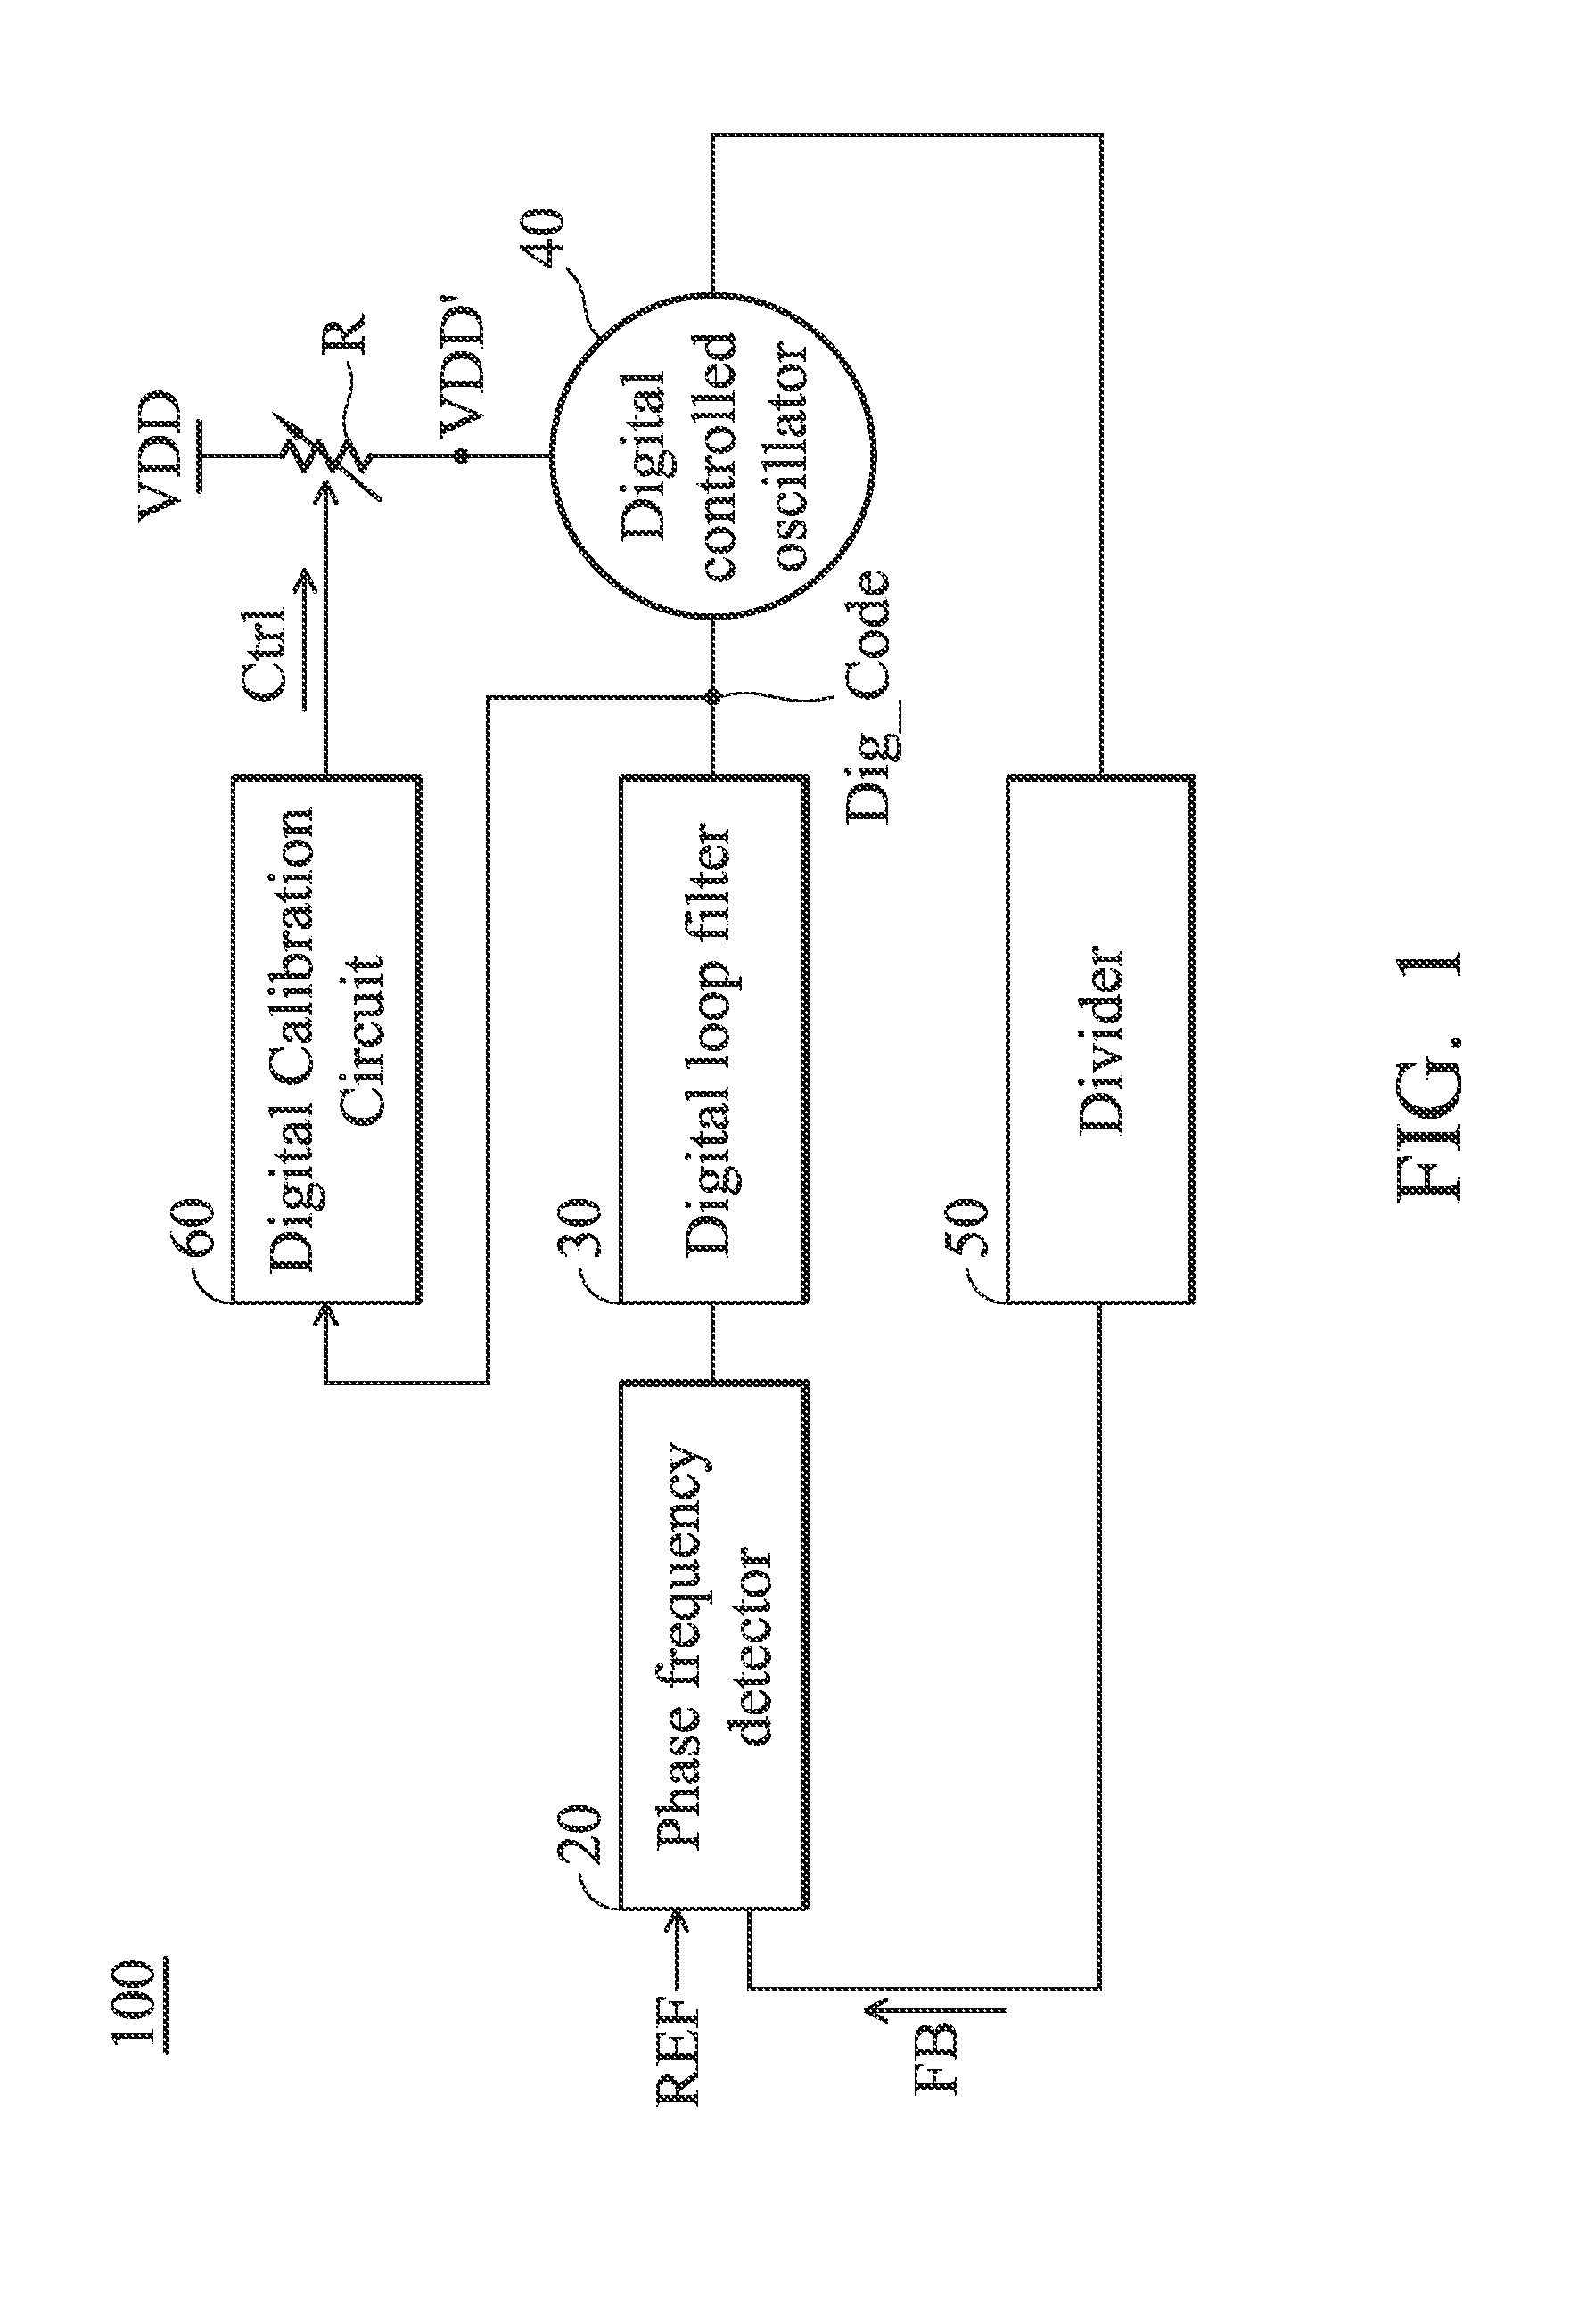 Supply voltage drift insensitive digitally controlled oscillator and phase locked loop circuit